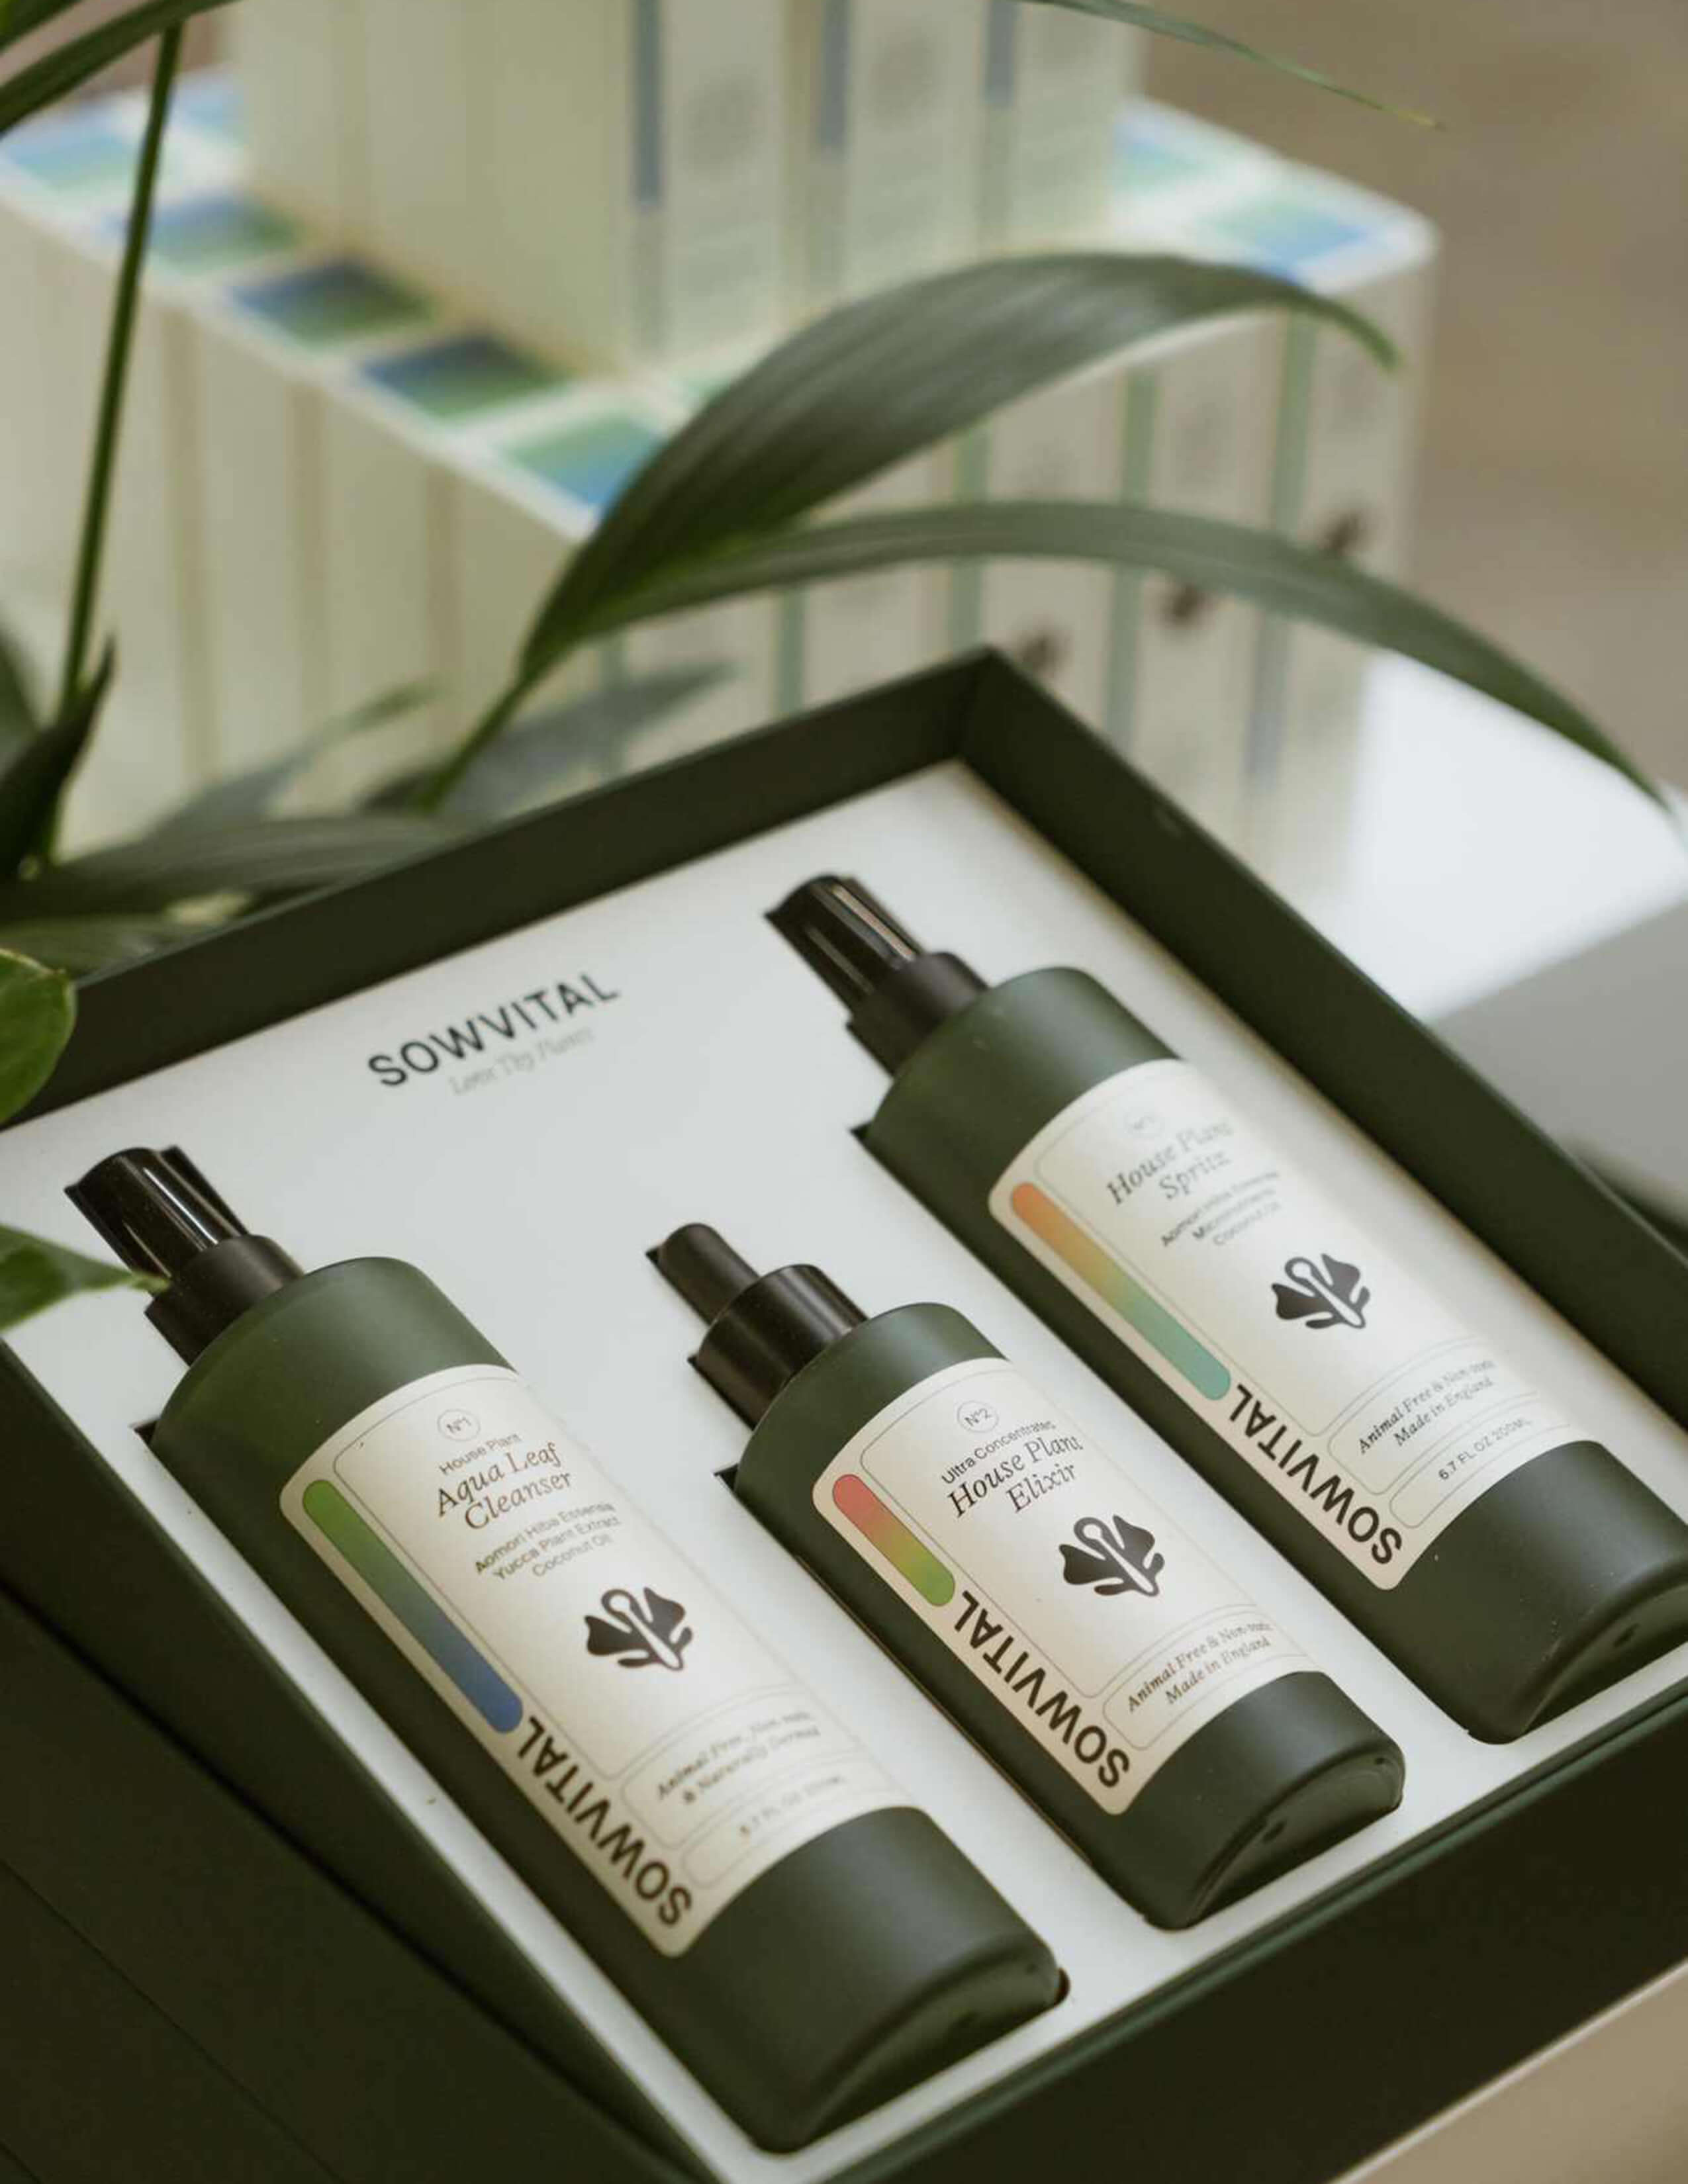 Sowvital’s three-step kit: Aqua Leaf Cleanser, House Plant Elixir, and House Plant Spritz packed in the box.